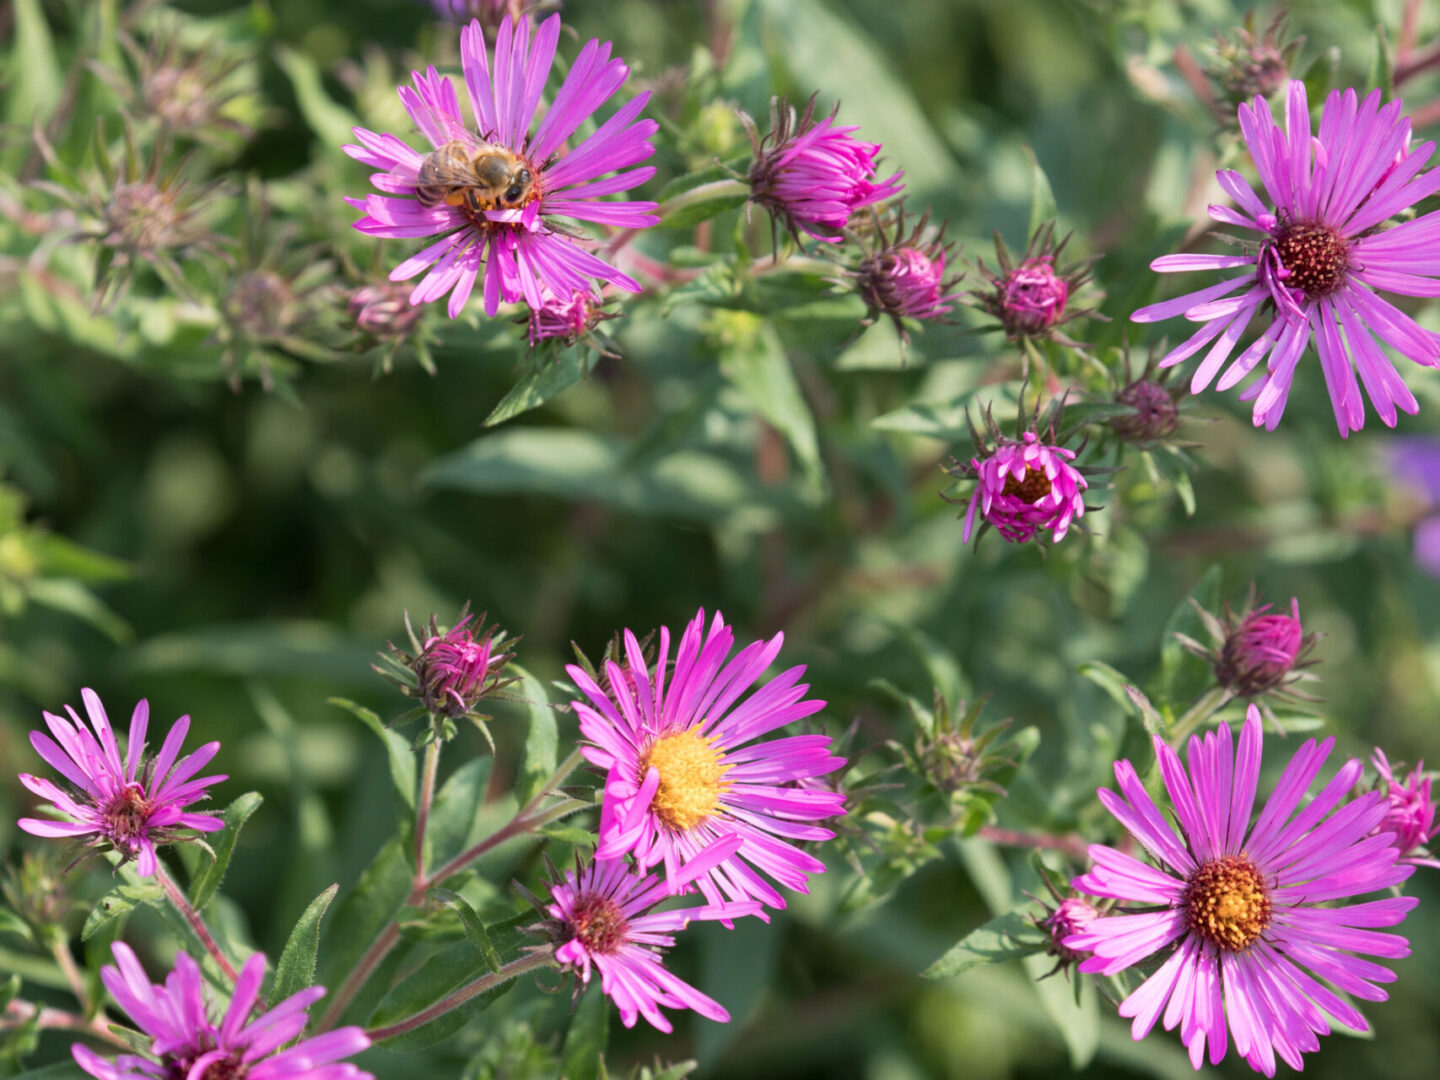 New England Aster blooming in Hudson River Park